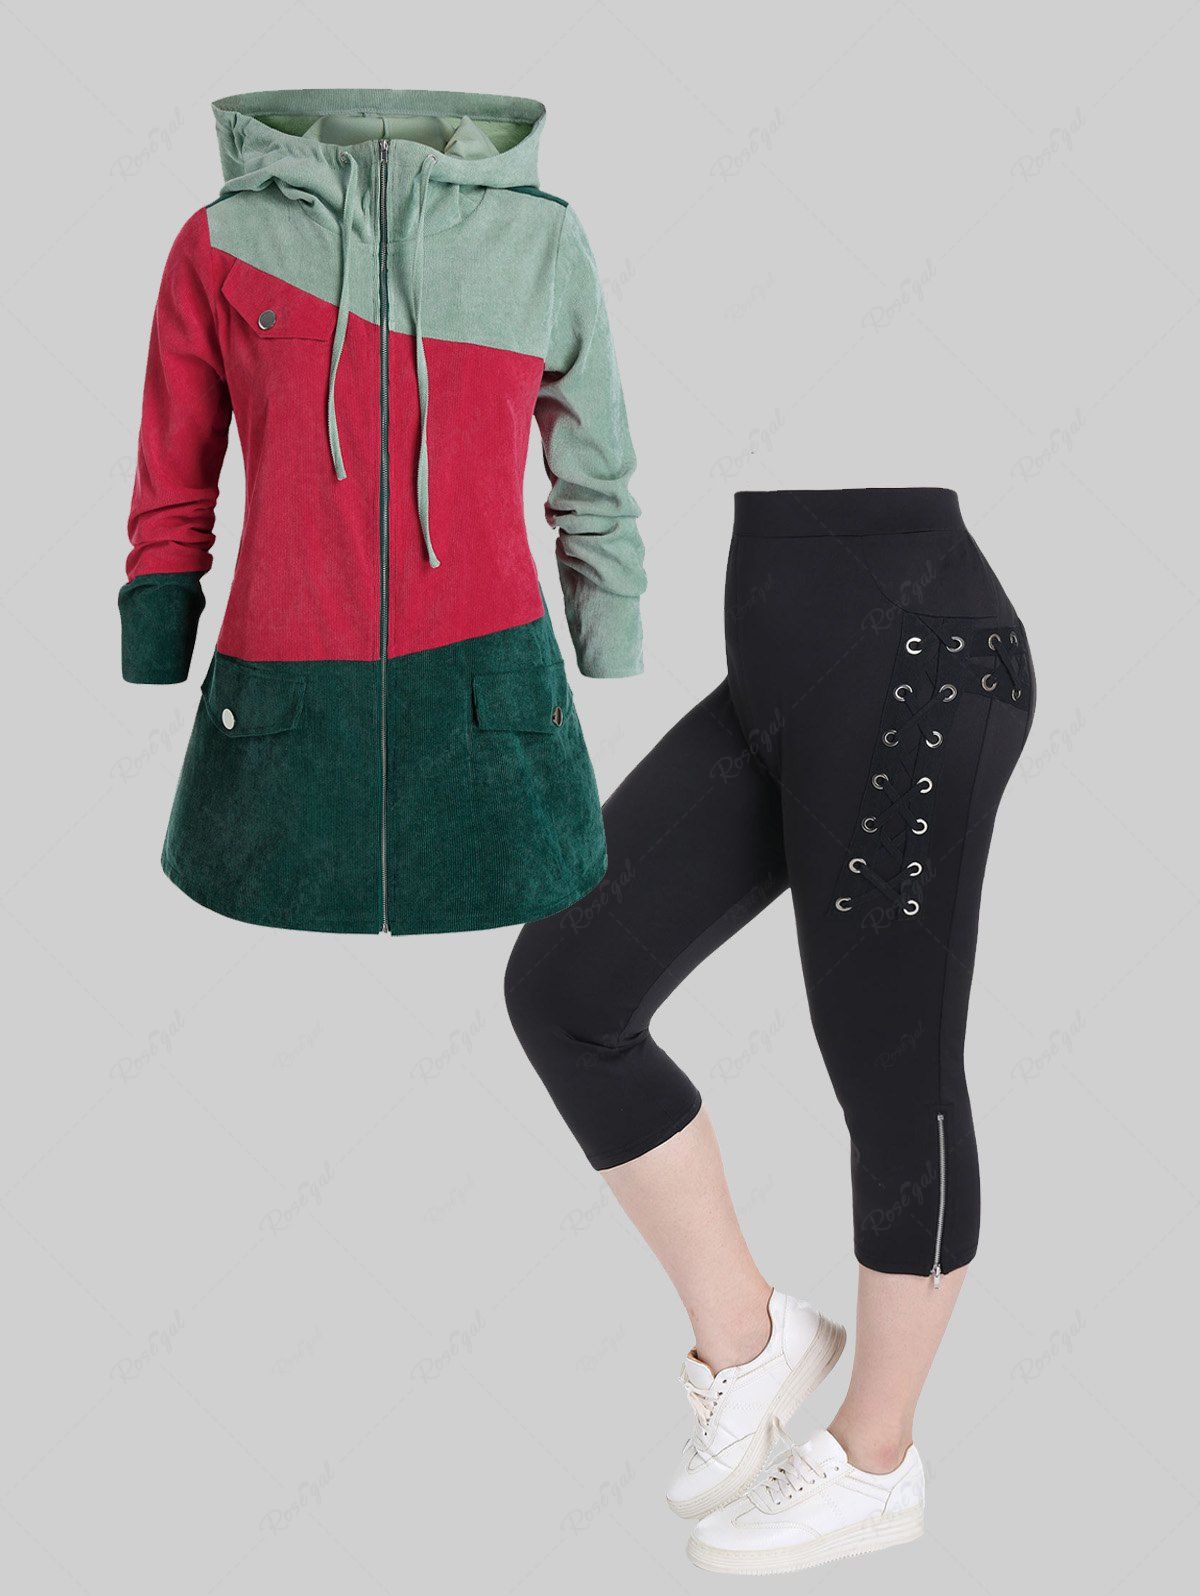 New Colorblock Corduroy Hooded Zip Up Jacket and High Waist Grommets Lace Up Zippered Capri Pants Plus Size Outfit  